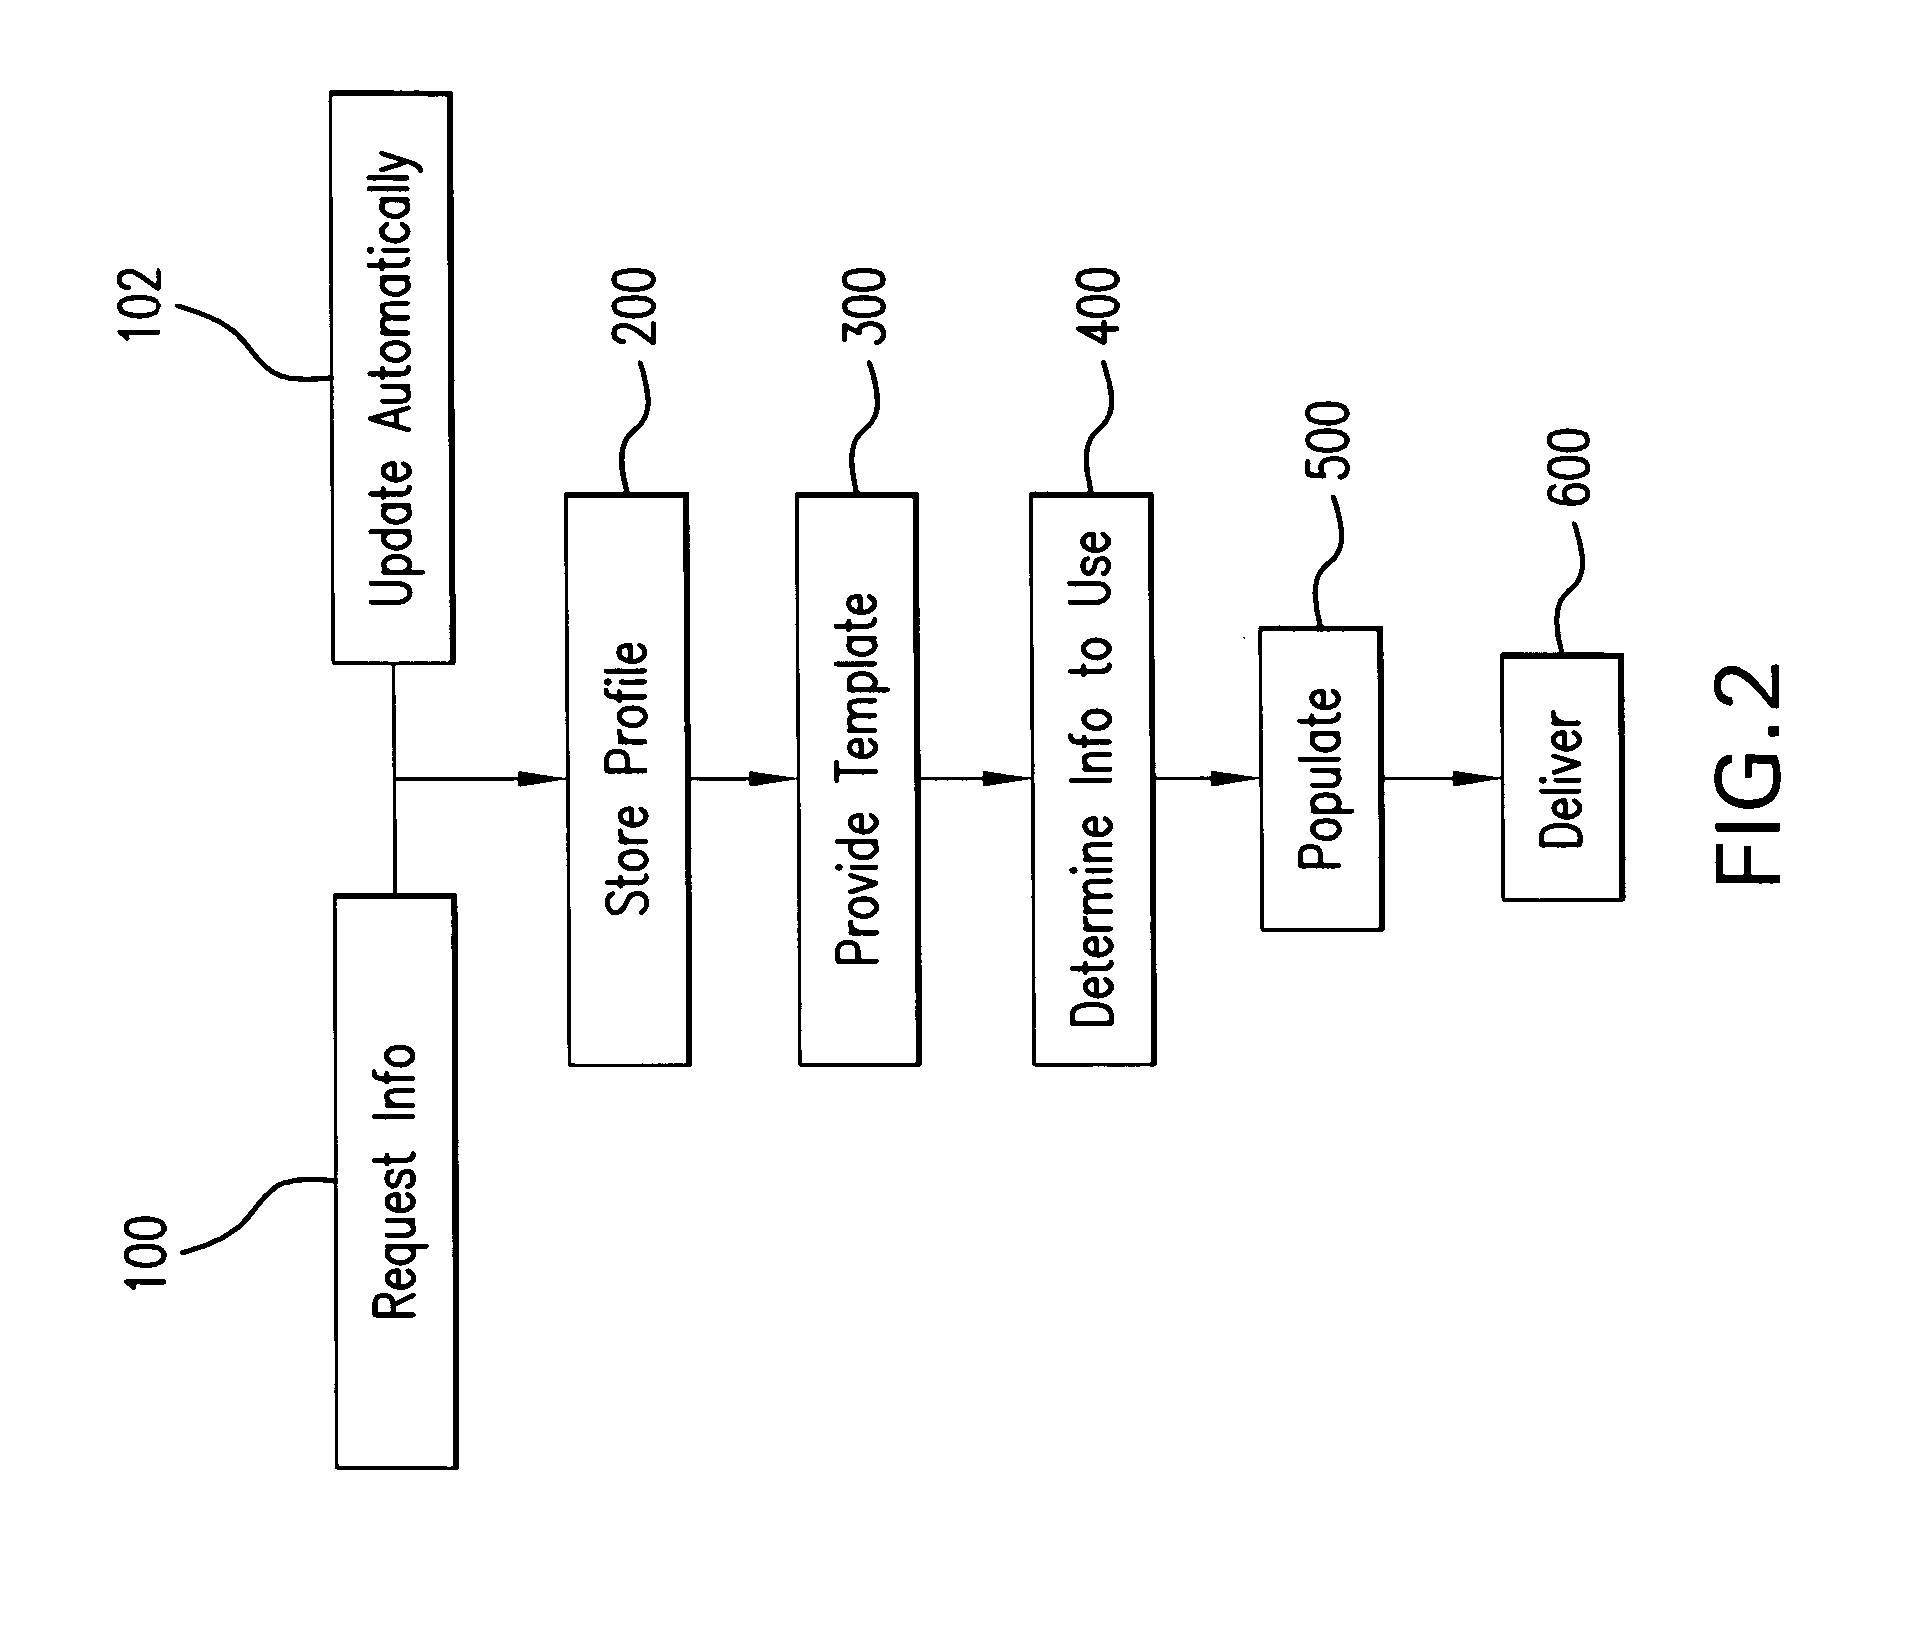 Methods, systems and computer readable media for providing customized works